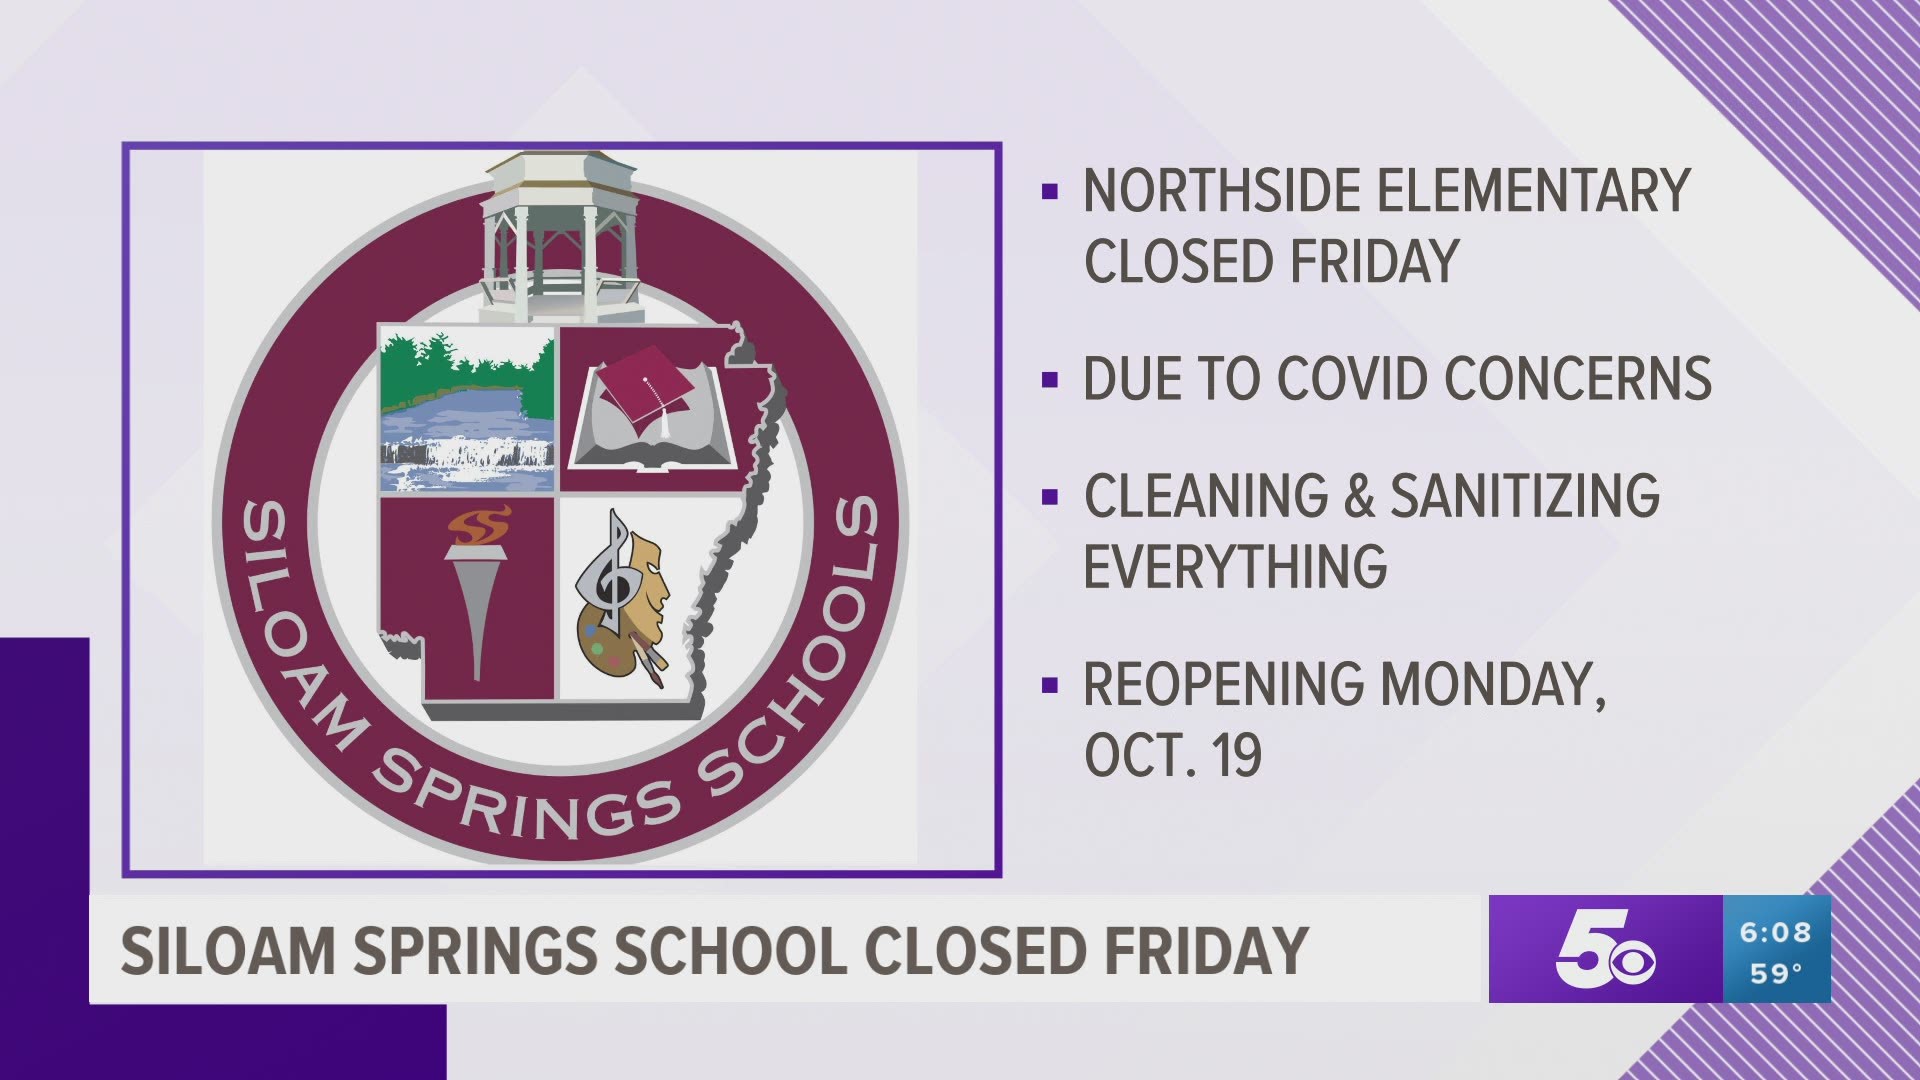 Siloam Springs School closed Friday due to COVID-19.